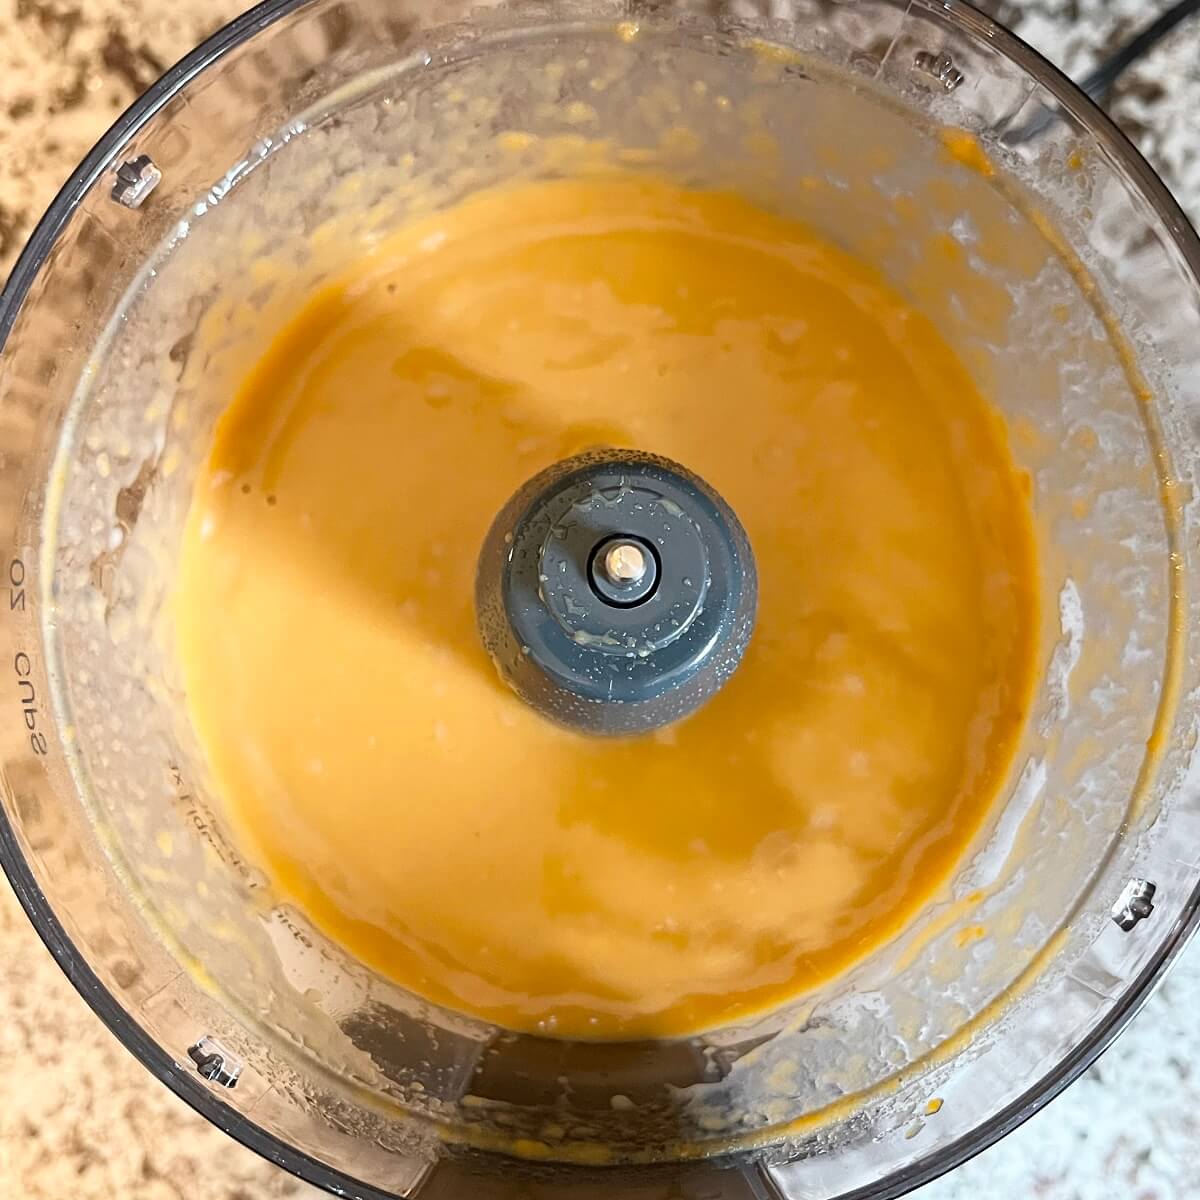 Blended ingredients for muffin batter in a food processor.